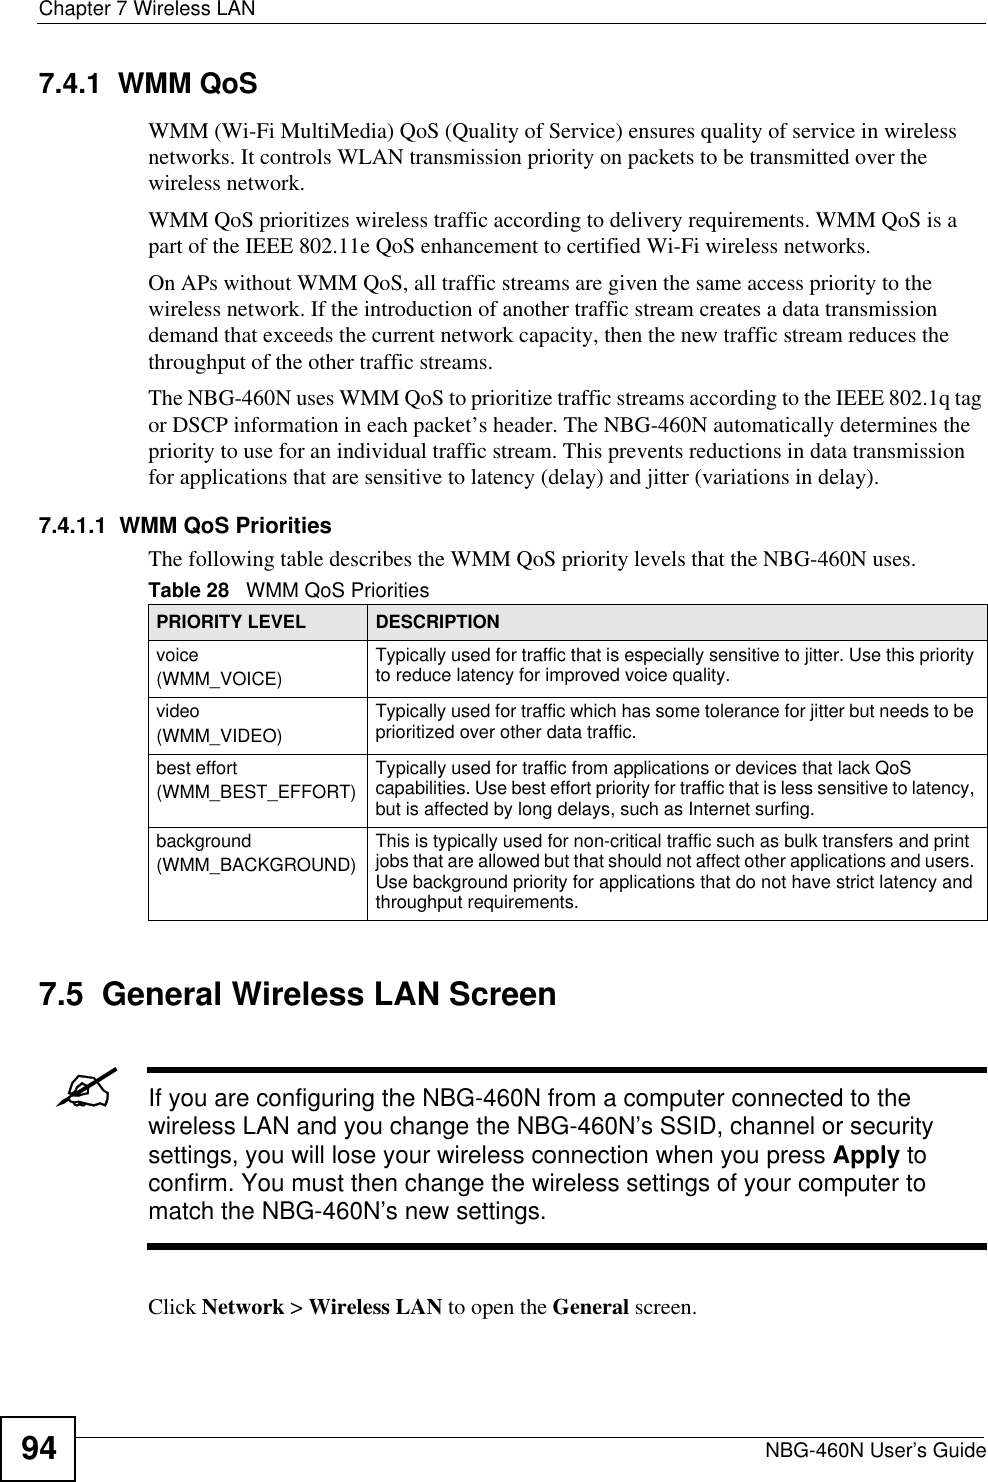 Chapter 7 Wireless LANNBG-460N User’s Guide947.4.1  WMM QoSWMM (Wi-Fi MultiMedia) QoS (Quality of Service) ensures quality of service in wireless networks. It controls WLAN transmission priority on packets to be transmitted over the wireless network.WMM QoS prioritizes wireless traffic according to delivery requirements. WMM QoS is a part of the IEEE 802.11e QoS enhancement to certified Wi-Fi wireless networks.On APs without WMM QoS, all traffic streams are given the same access priority to the wireless network. If the introduction of another traffic stream creates a data transmission demand that exceeds the current network capacity, then the new traffic stream reduces the throughput of the other traffic streams.The NBG-460N uses WMM QoS to prioritize traffic streams according to the IEEE 802.1q tag or DSCP information in each packet’s header. The NBG-460N automatically determines the priority to use for an individual traffic stream. This prevents reductions in data transmission for applications that are sensitive to latency (delay) and jitter (variations in delay).7.4.1.1  WMM QoS PrioritiesThe following table describes the WMM QoS priority levels that the NBG-460N uses.7.5  General Wireless LAN Screen &quot;If you are configuring the NBG-460N from a computer connected to the wireless LAN and you change the NBG-460N’s SSID, channel or security settings, you will lose your wireless connection when you press Apply to confirm. You must then change the wireless settings of your computer to match the NBG-460N’s new settings.Click Network &gt; Wireless LAN to open the General screen.Table 28   WMM QoS PrioritiesPRIORITY LEVEL DESCRIPTIONvoice(WMM_VOICE)Typically used for traffic that is especially sensitive to jitter. Use this priority to reduce latency for improved voice quality.video(WMM_VIDEO)Typically used for traffic which has some tolerance for jitter but needs to be prioritized over other data traffic.best effort(WMM_BEST_EFFORT)Typically used for traffic from applications or devices that lack QoS capabilities. Use best effort priority for traffic that is less sensitive to latency, but is affected by long delays, such as Internet surfing.background(WMM_BACKGROUND)This is typically used for non-critical traffic such as bulk transfers and print jobs that are allowed but that should not affect other applications and users. Use background priority for applications that do not have strict latency and throughput requirements.